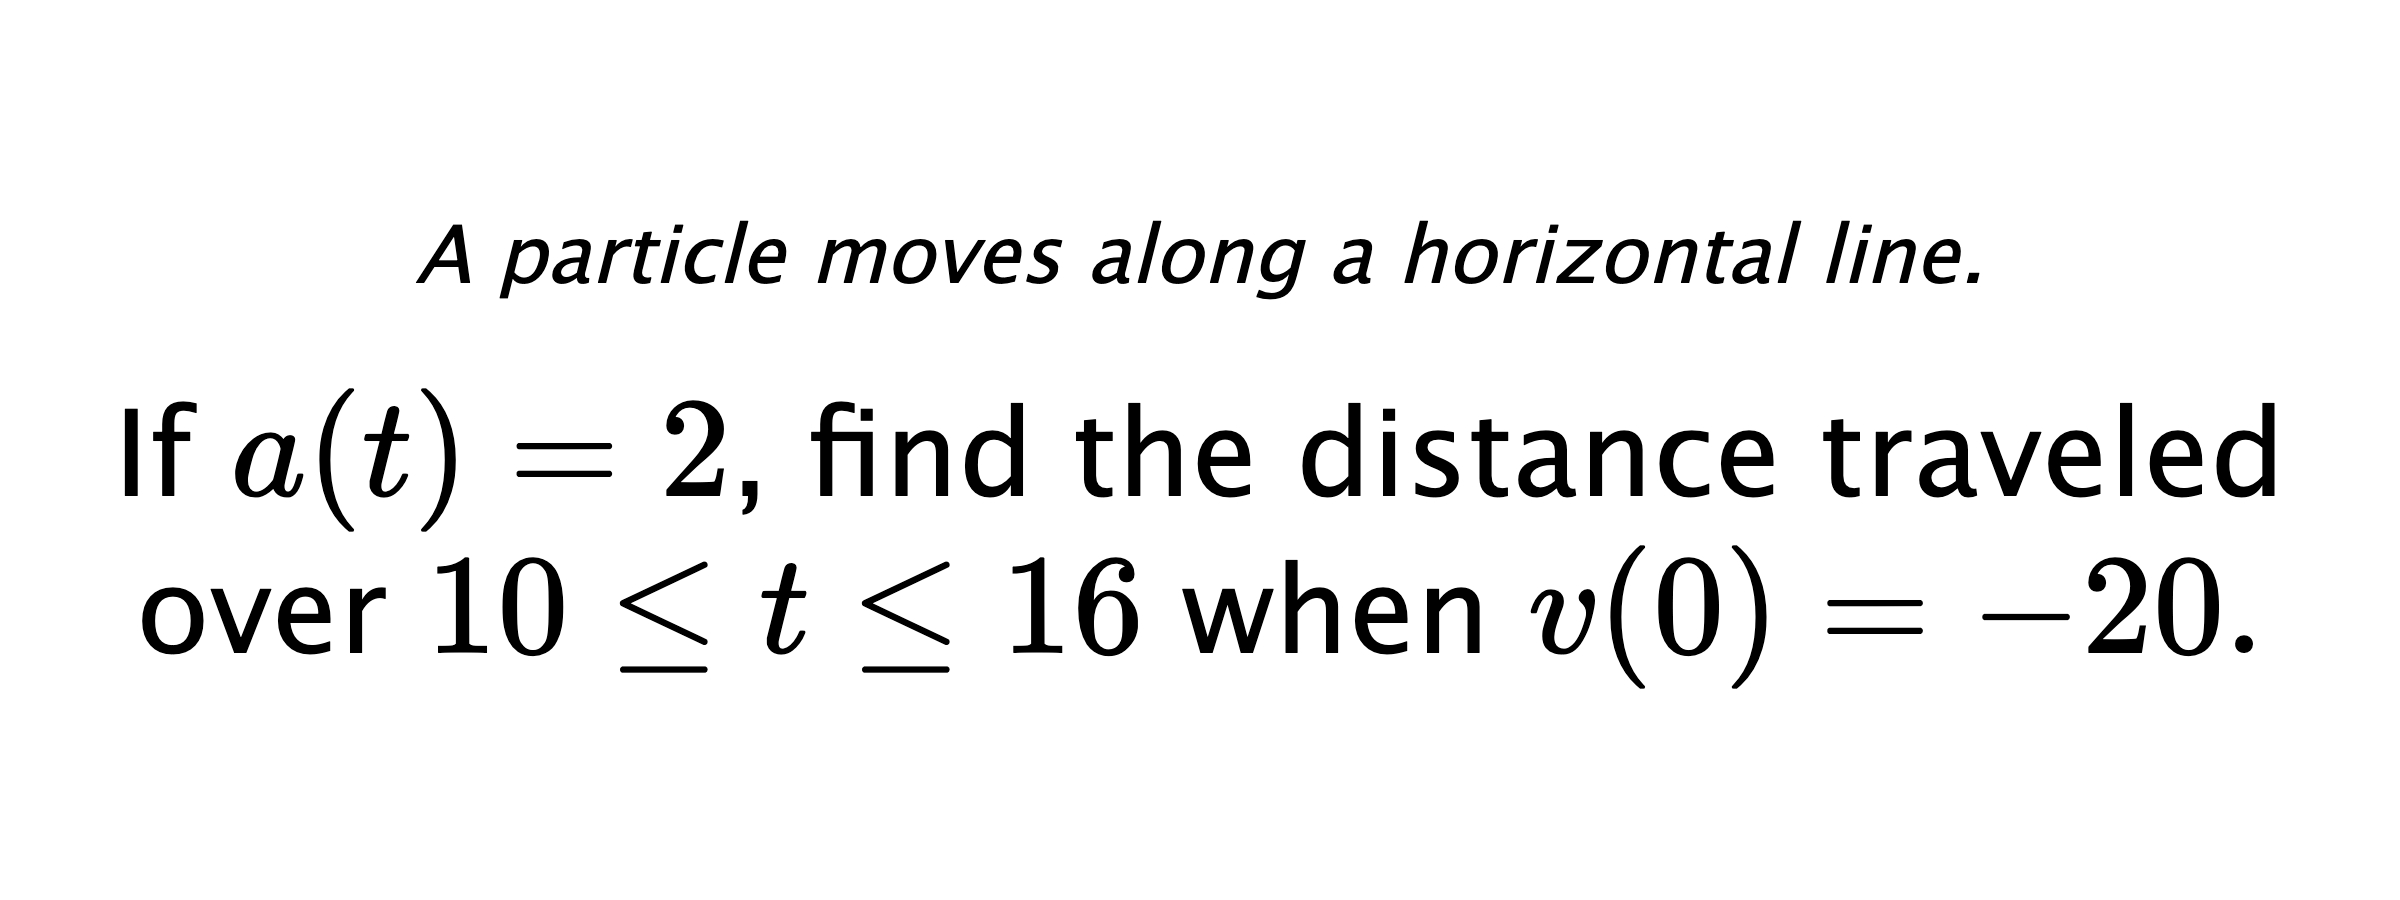 A particle moves along a horizontal line. If $ a(t)=2 $, find the distance traveled over $ 10 \leq t \leq 16 $ when $ v(0)=-20 .$